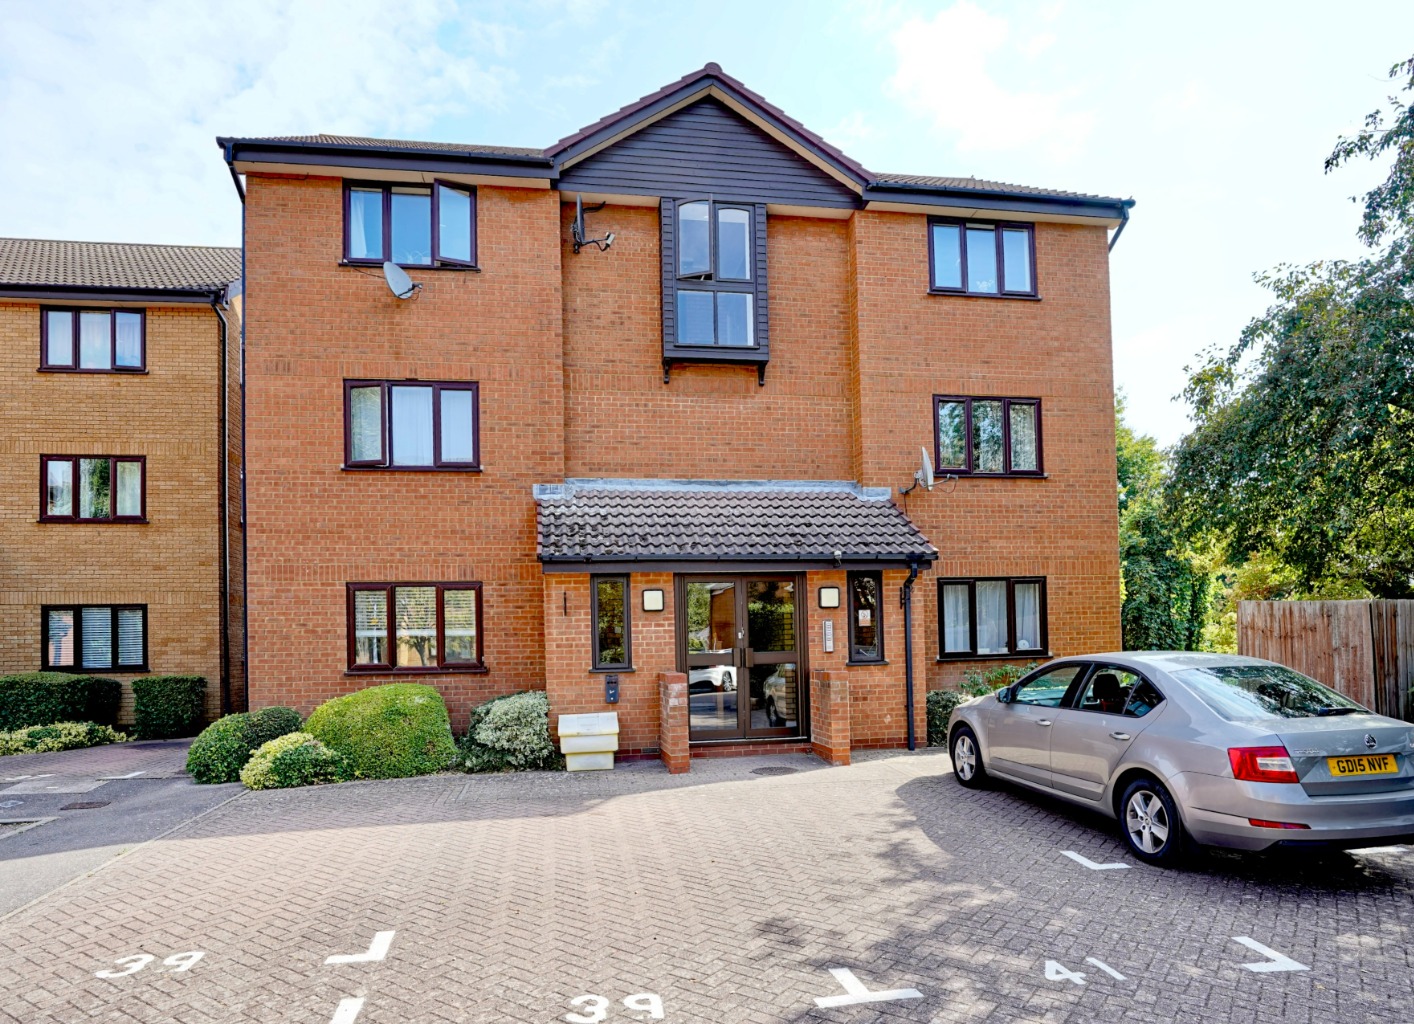 2 bed flat for sale in Ullswater, Huntingdon, PE29